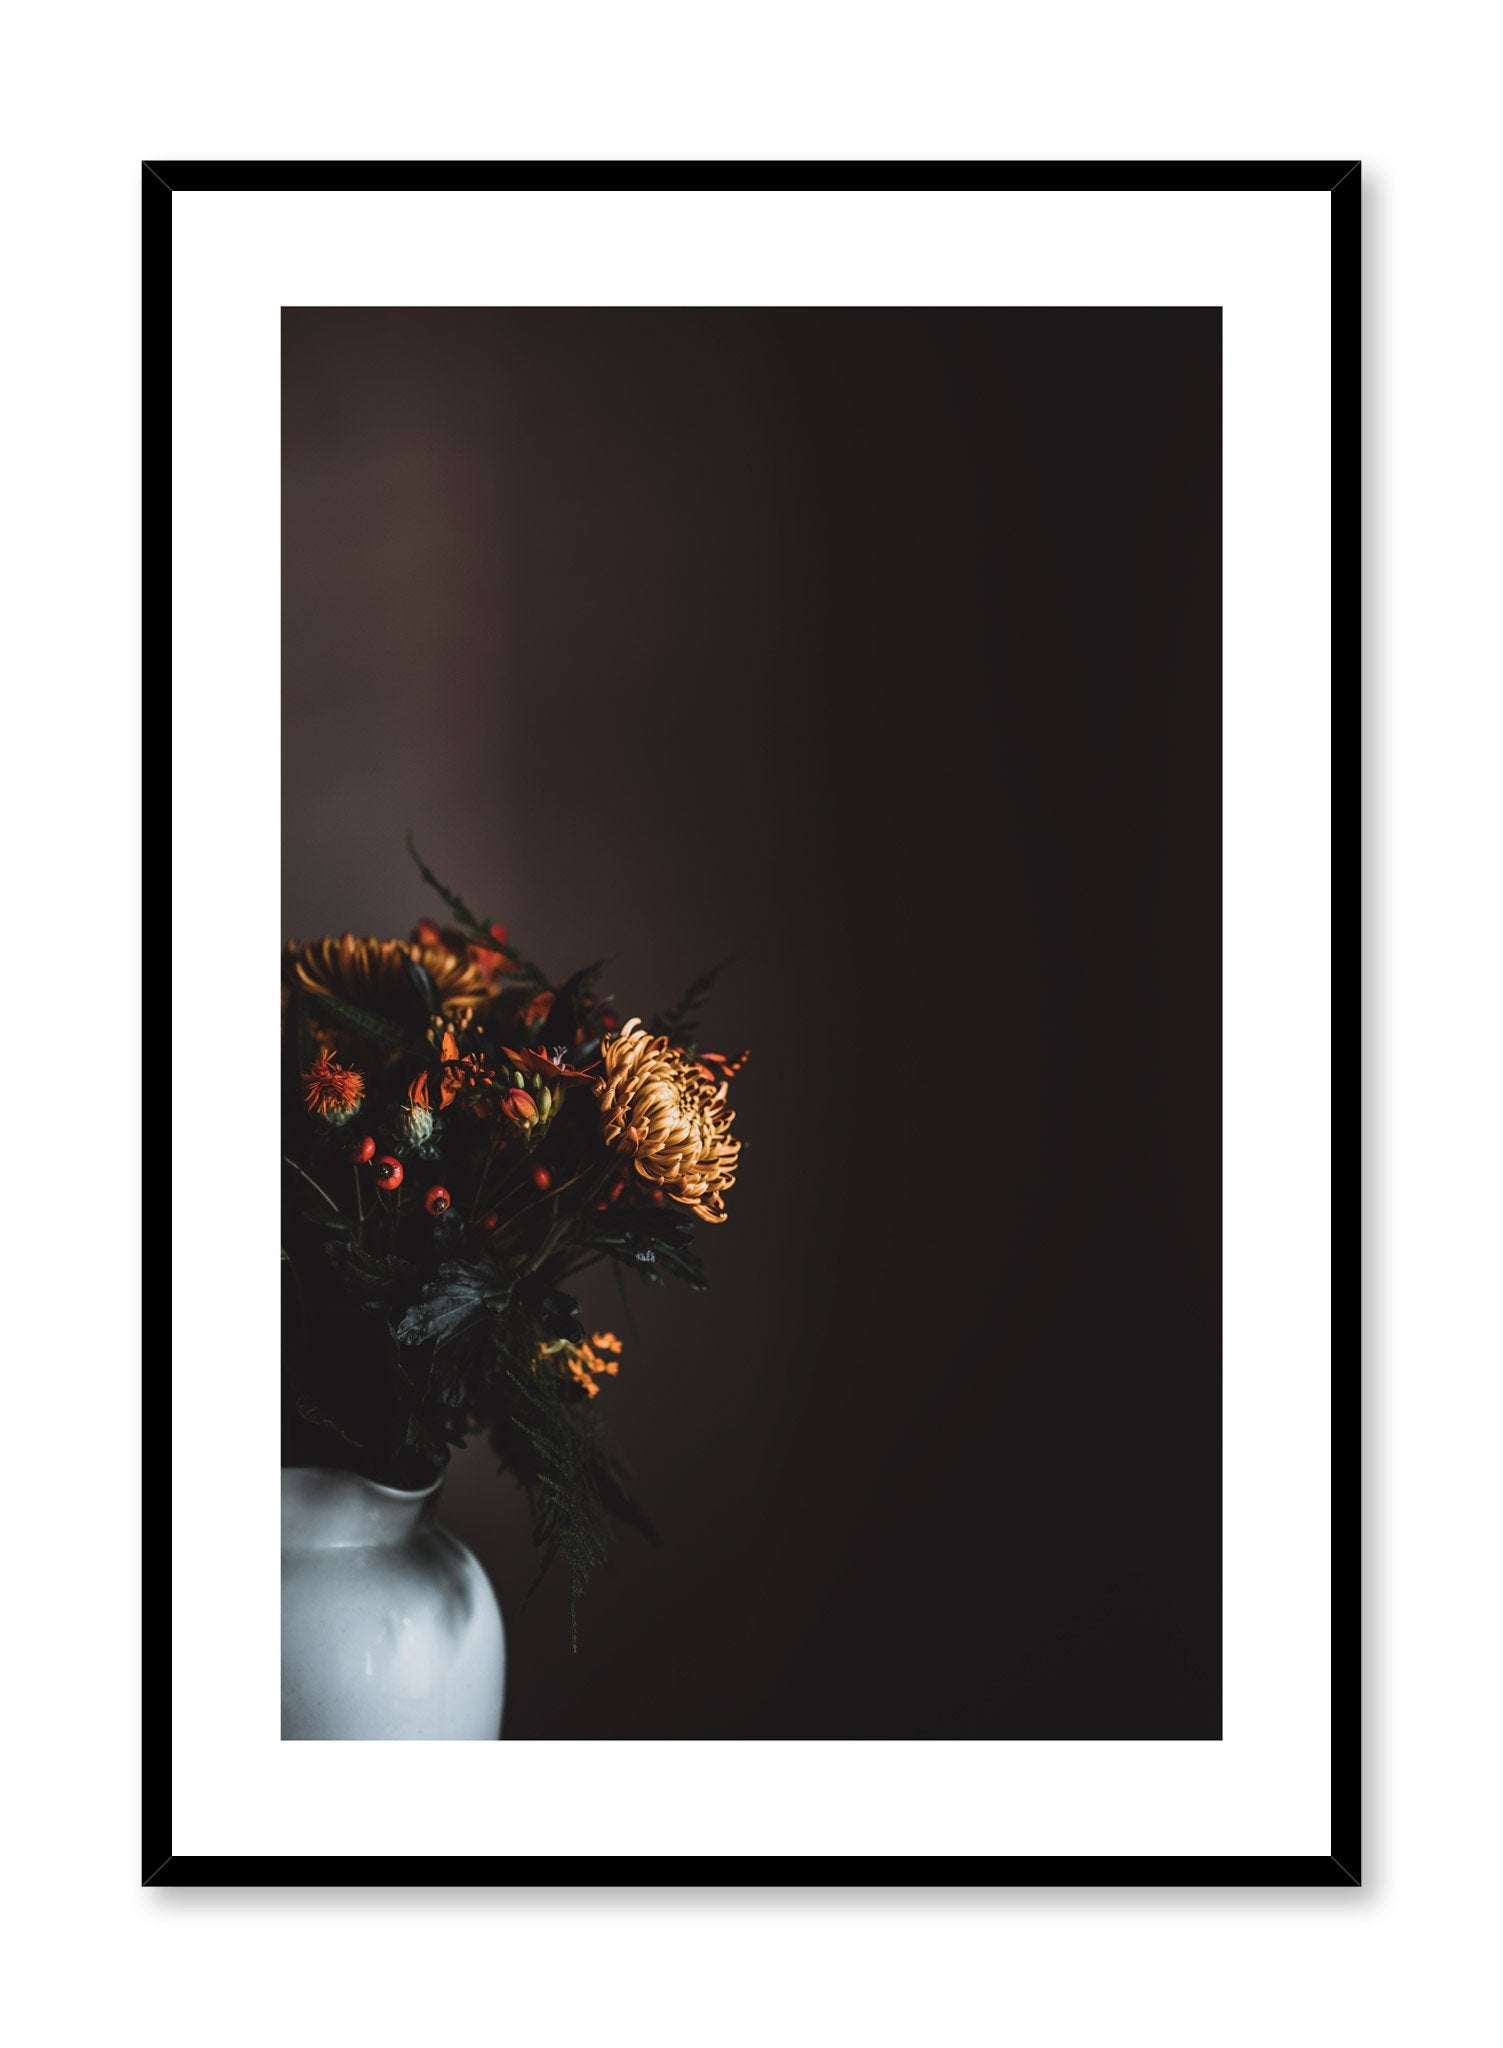 Minimalist design poster by Opposite Wall with Orange Tinted Flower Bouquet photography